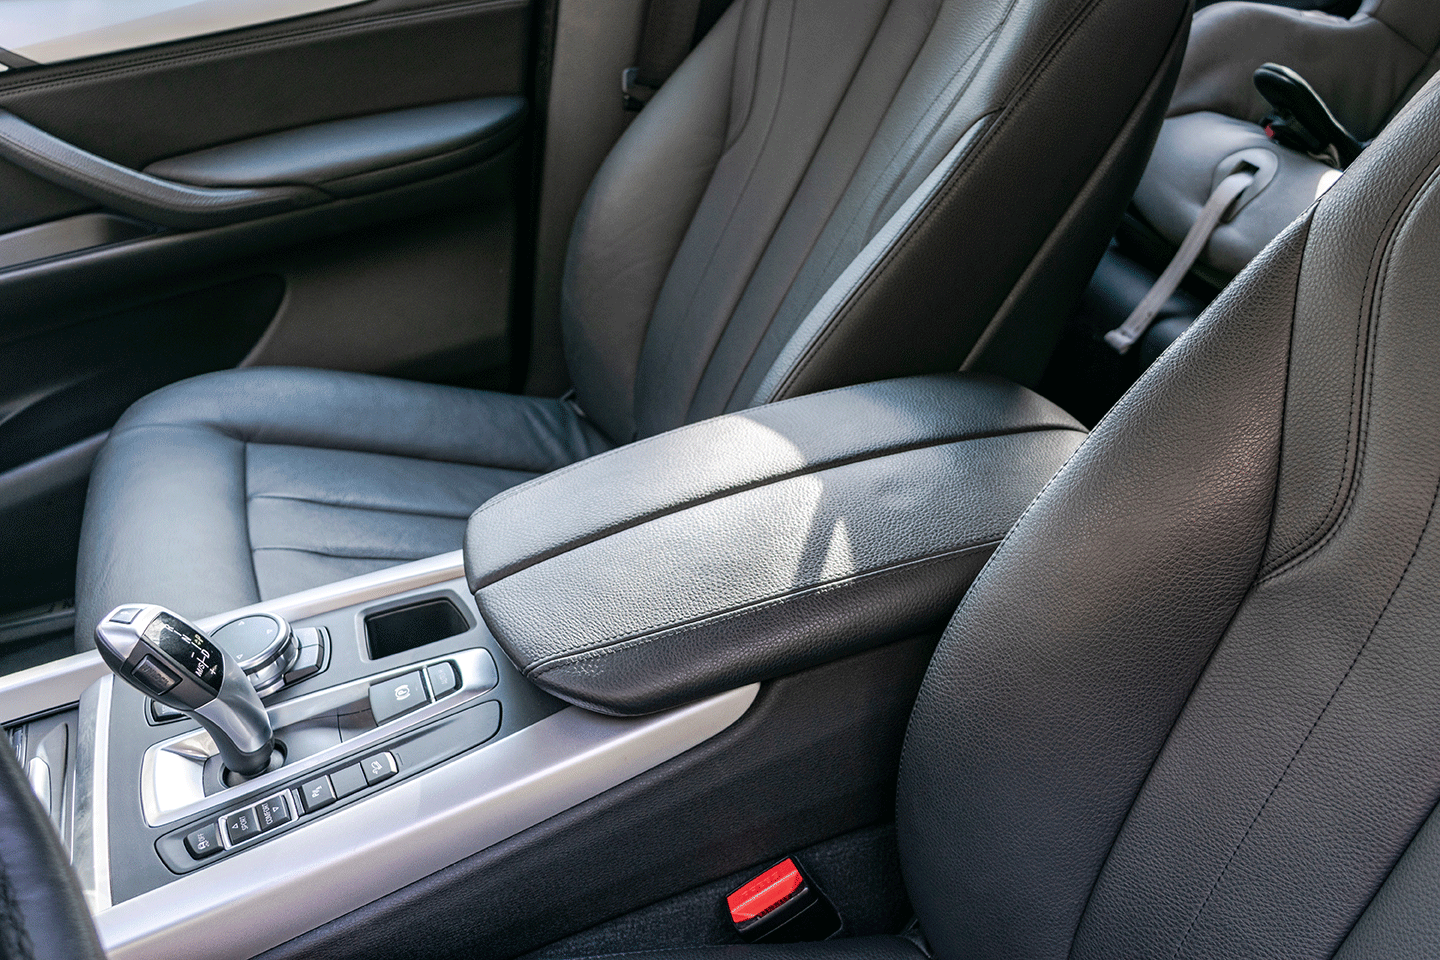 Multi-function armrests have many different functions in modern cars